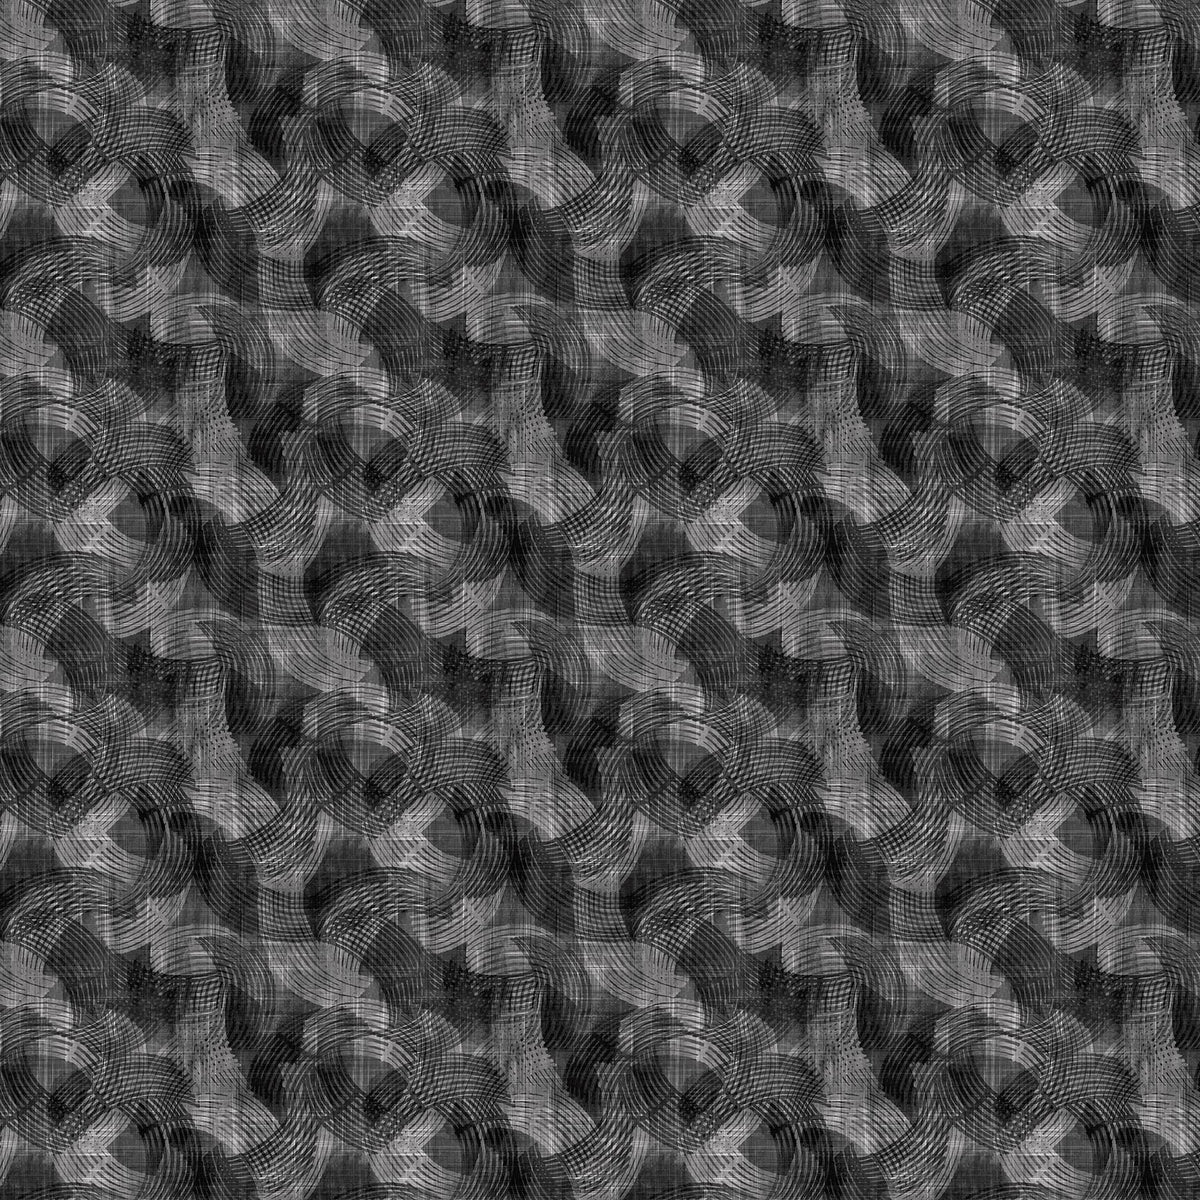 108" Crescent Quilt Backing Fabric - Textured Arcs in Charcoal Gray/Black - 2970-99